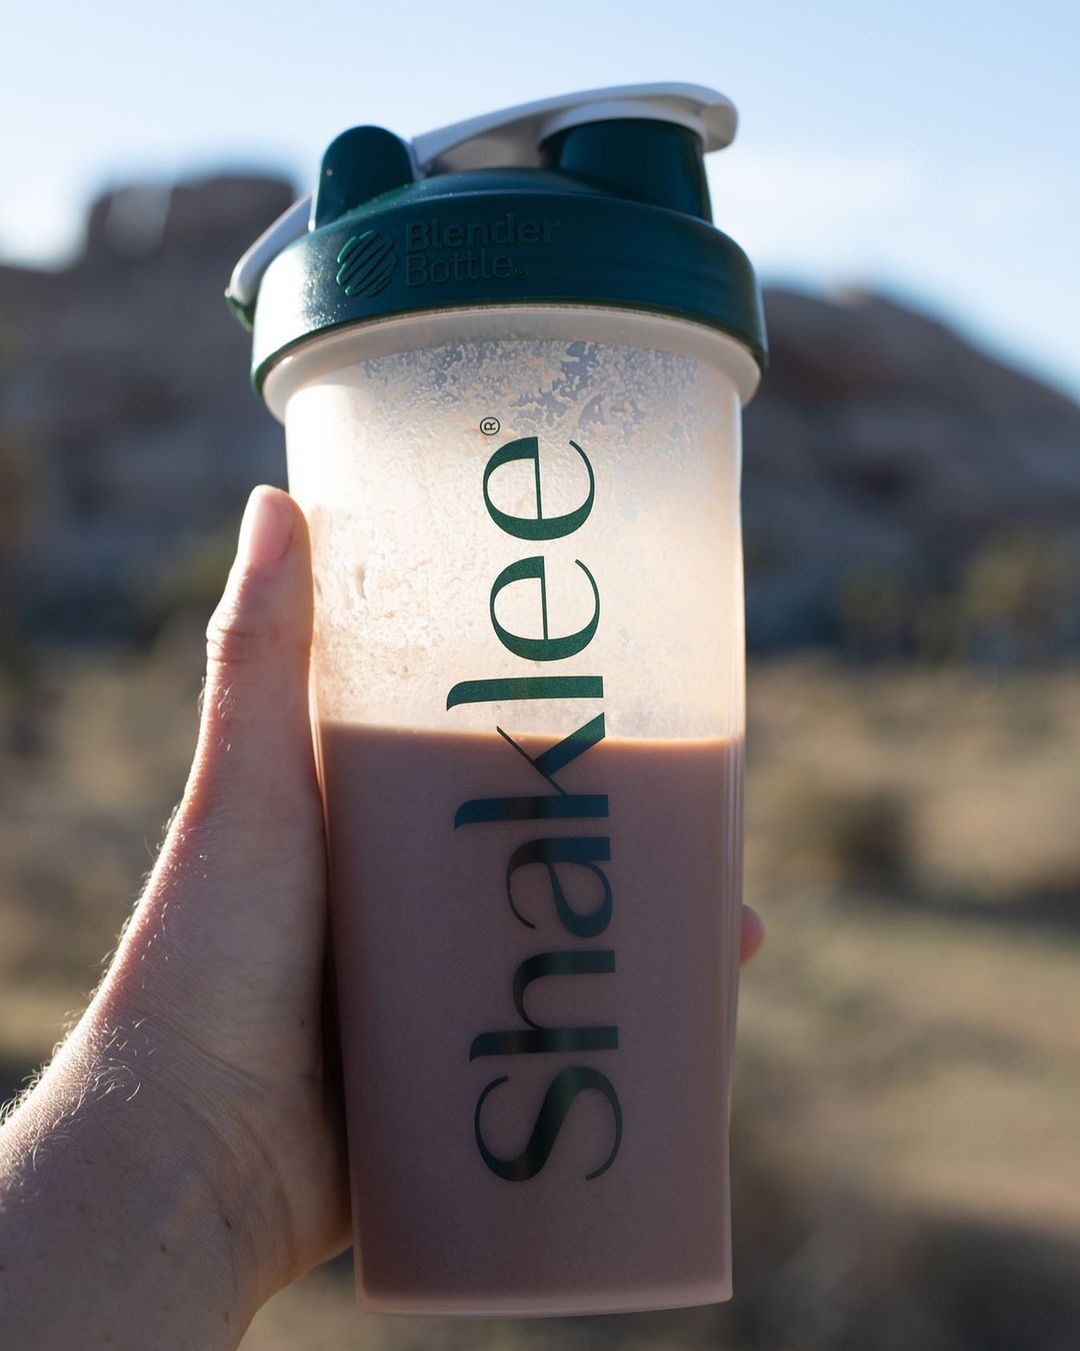 Life Shake hits different when you drink it outside in nature. &#8230;, Shaklee Corporation